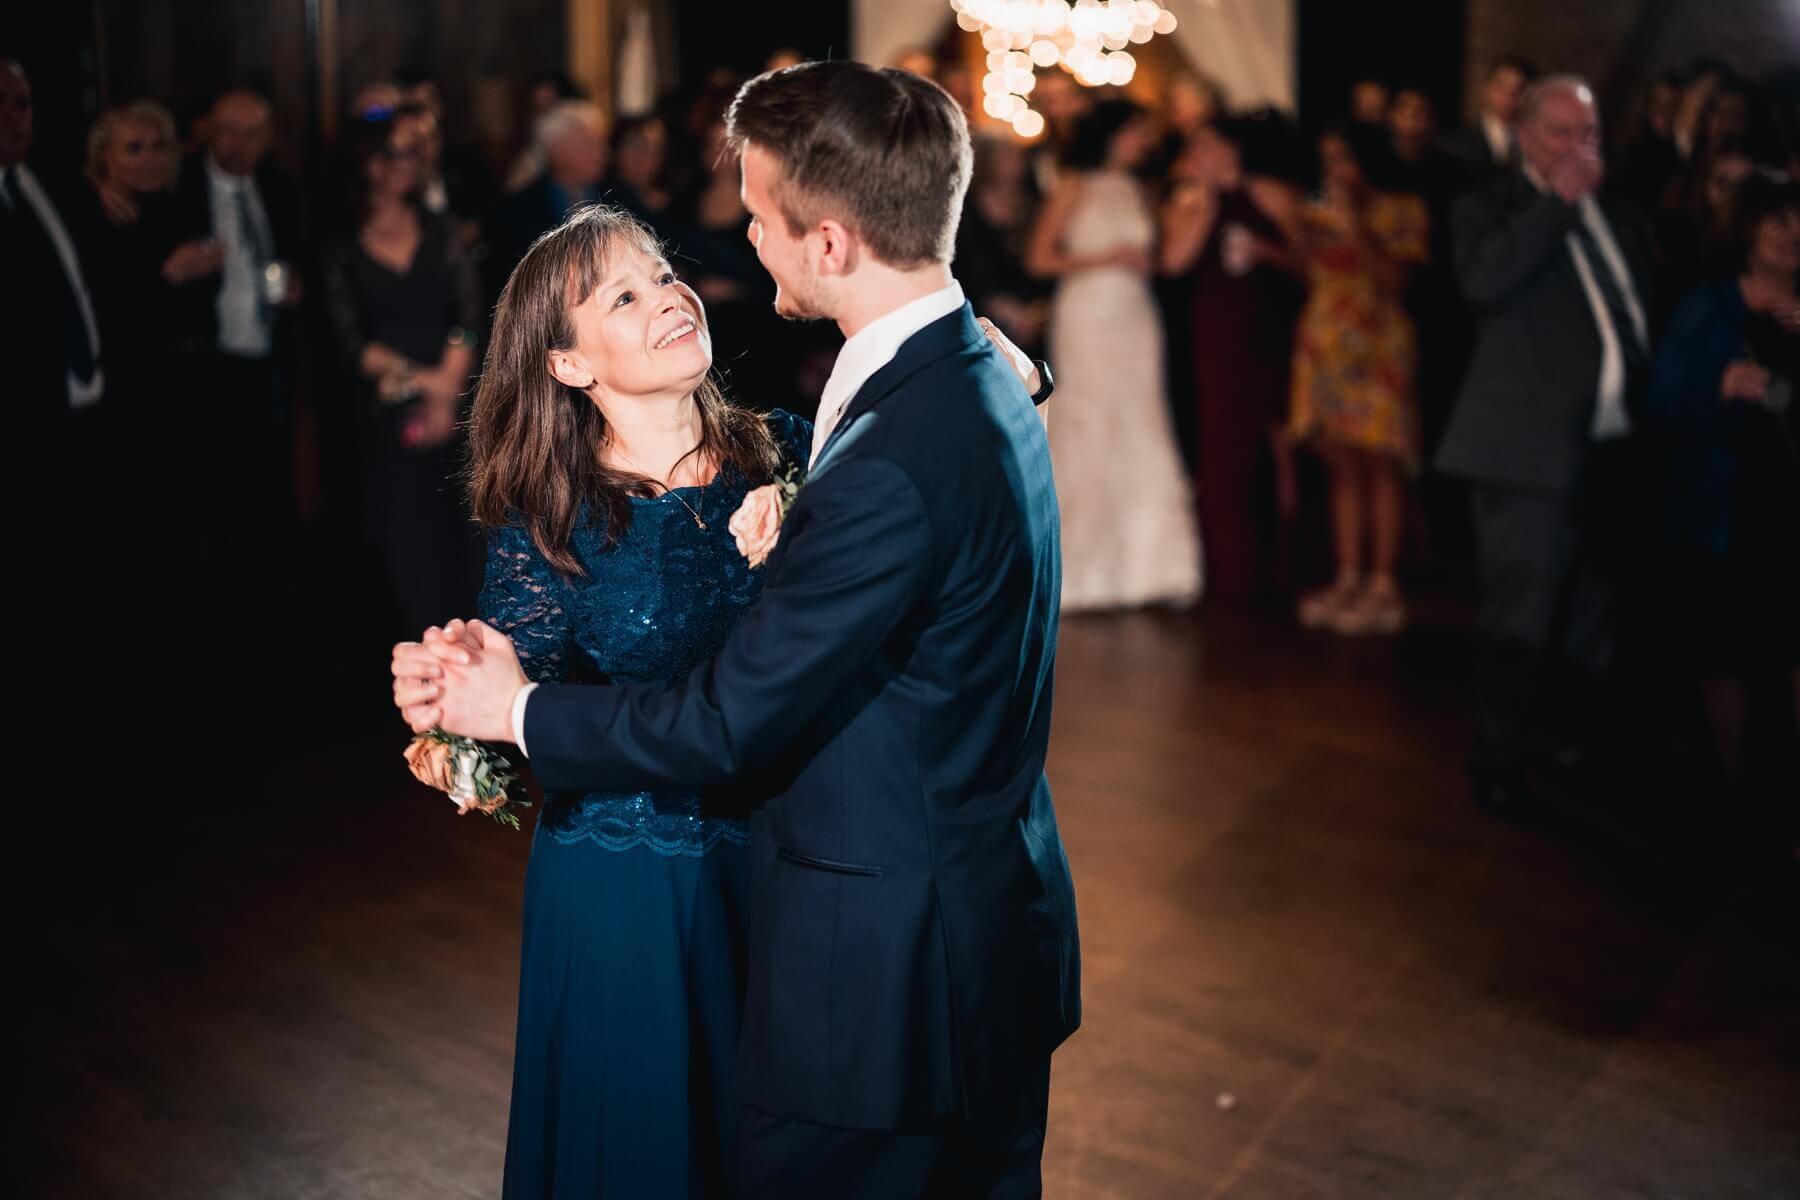 Groom dancing with mom at wedding venue in Illinois